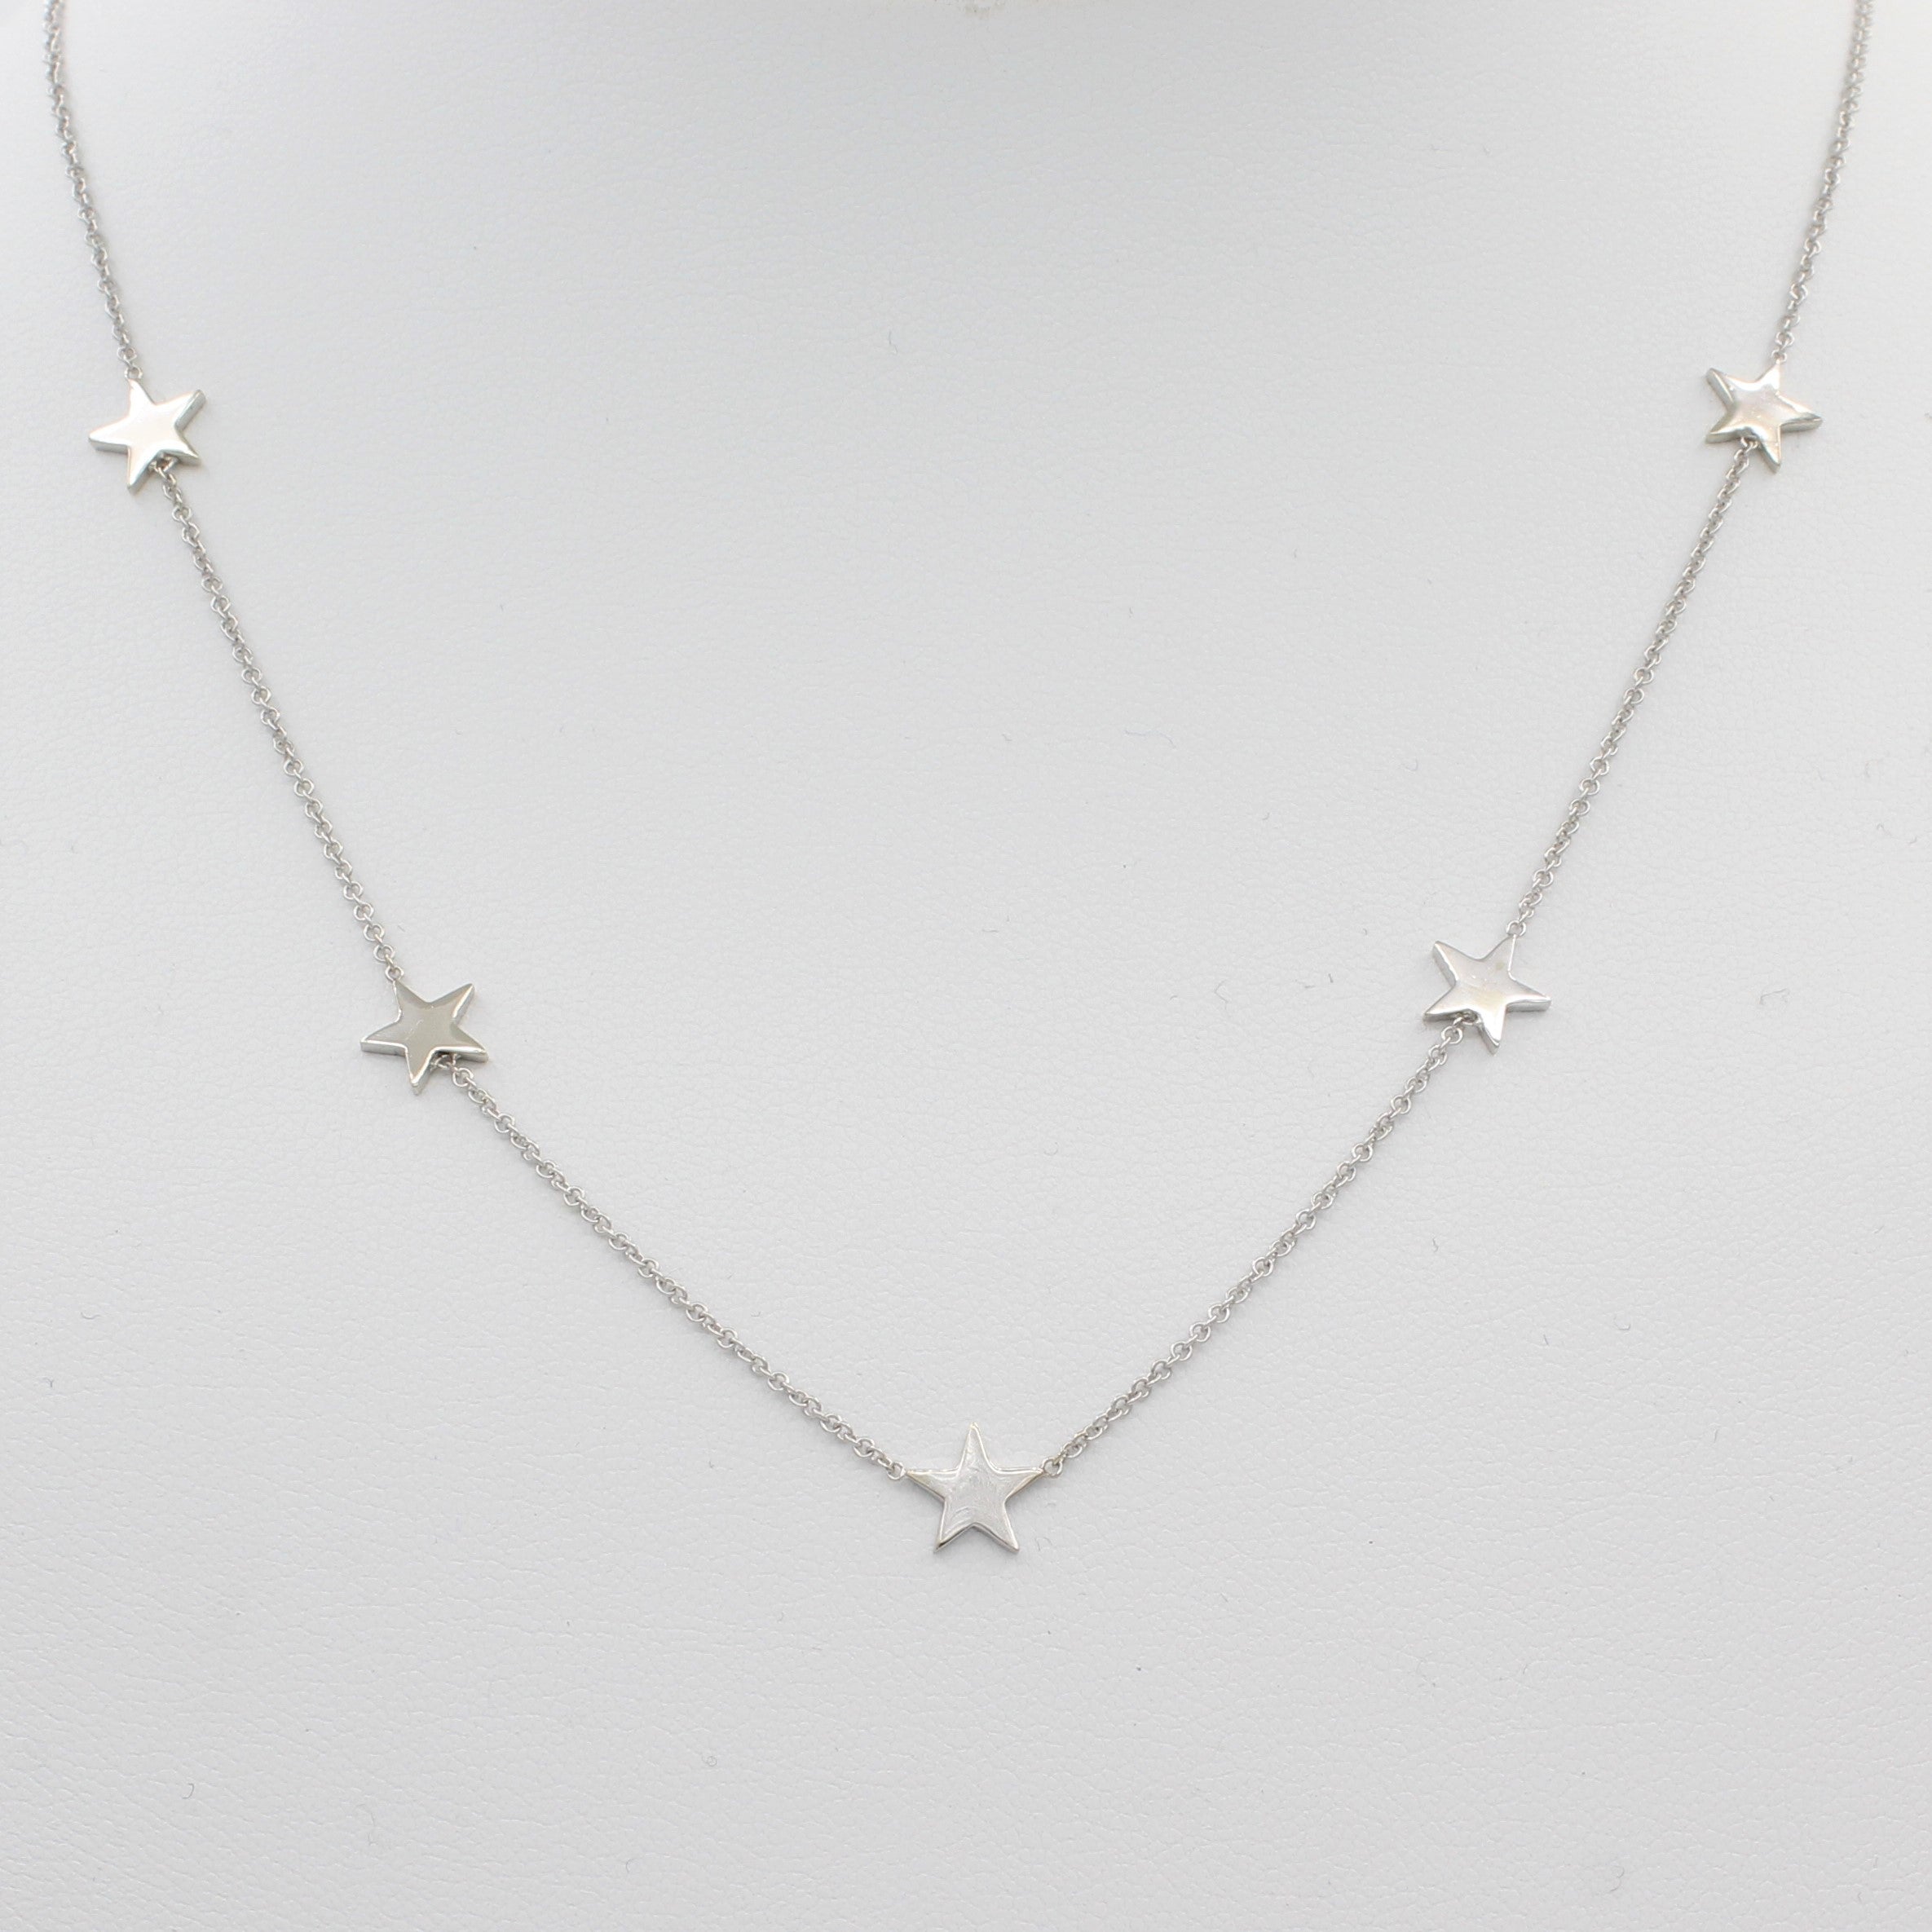 14k White Gold Five Station Star Necklace, front view of necklace displayed on mannequin neckline.